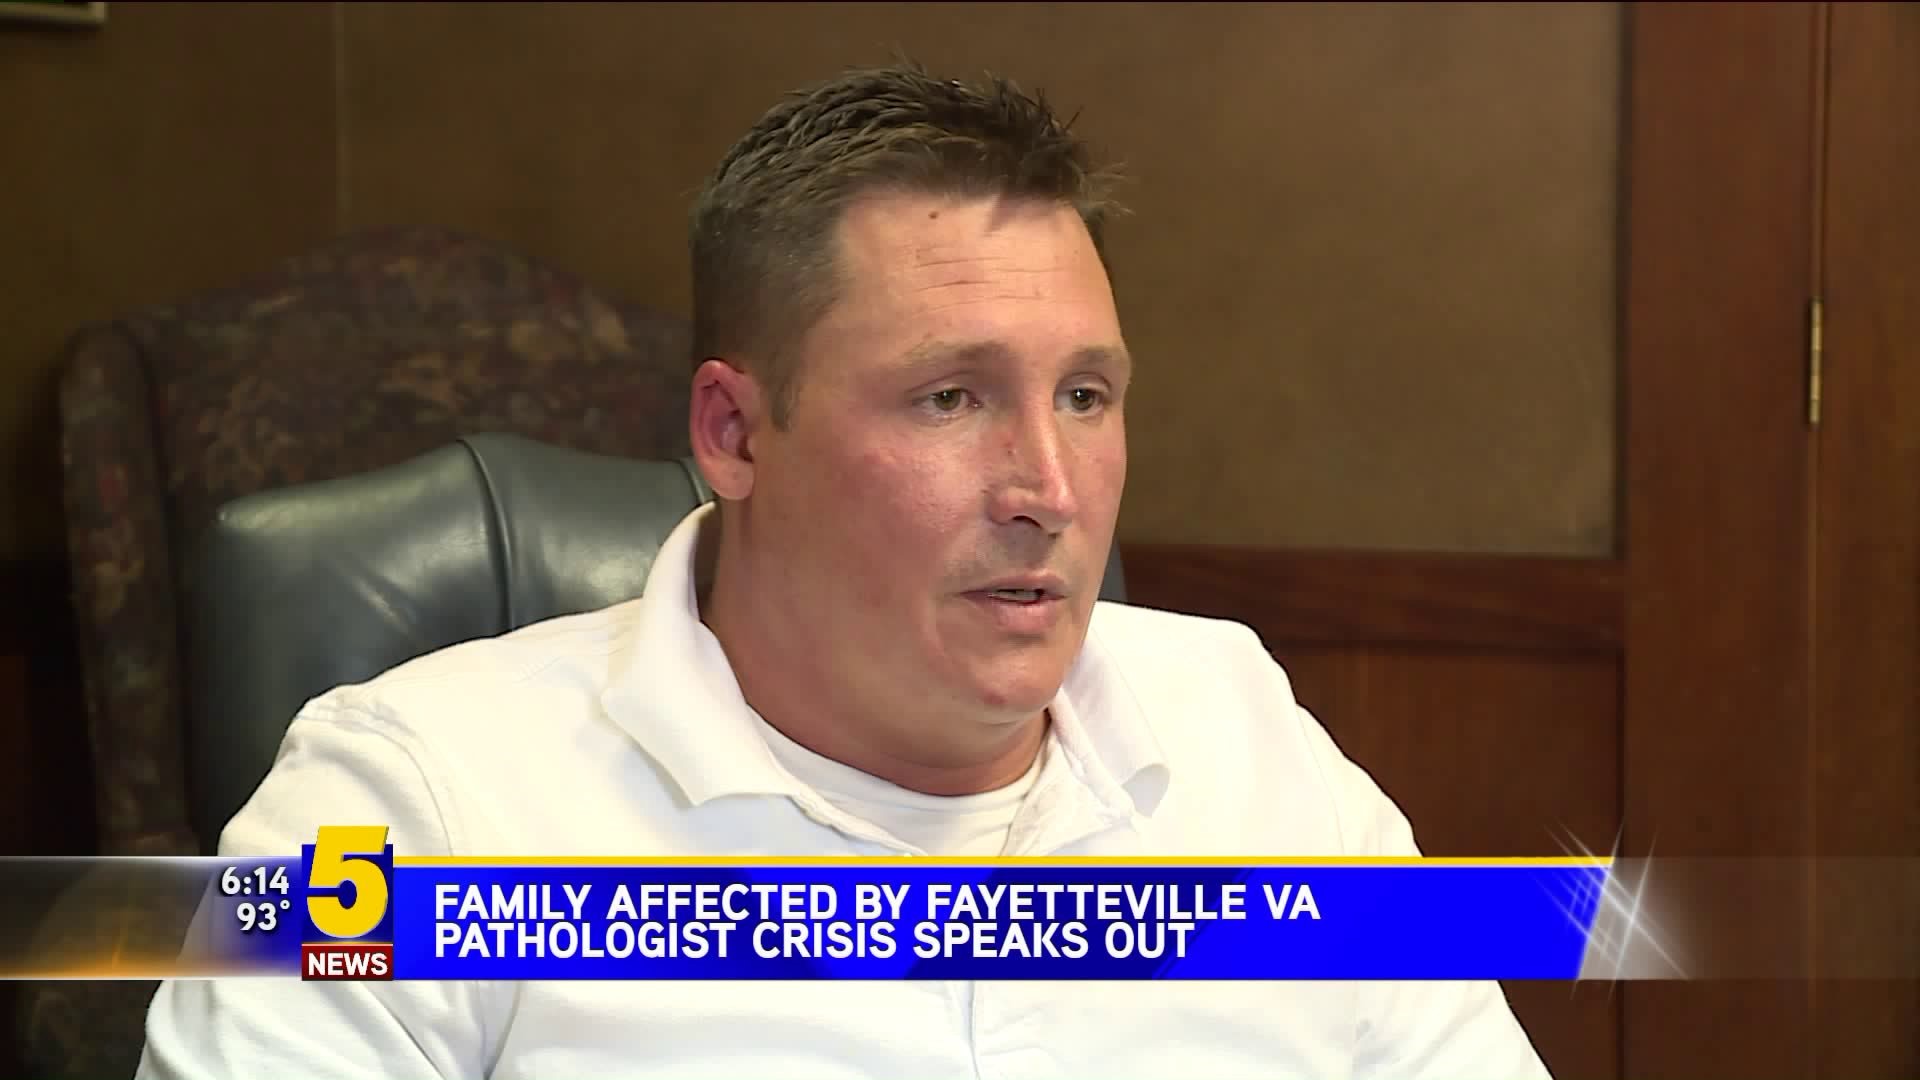 Family Affected By Fayetteville VA Speaks Out